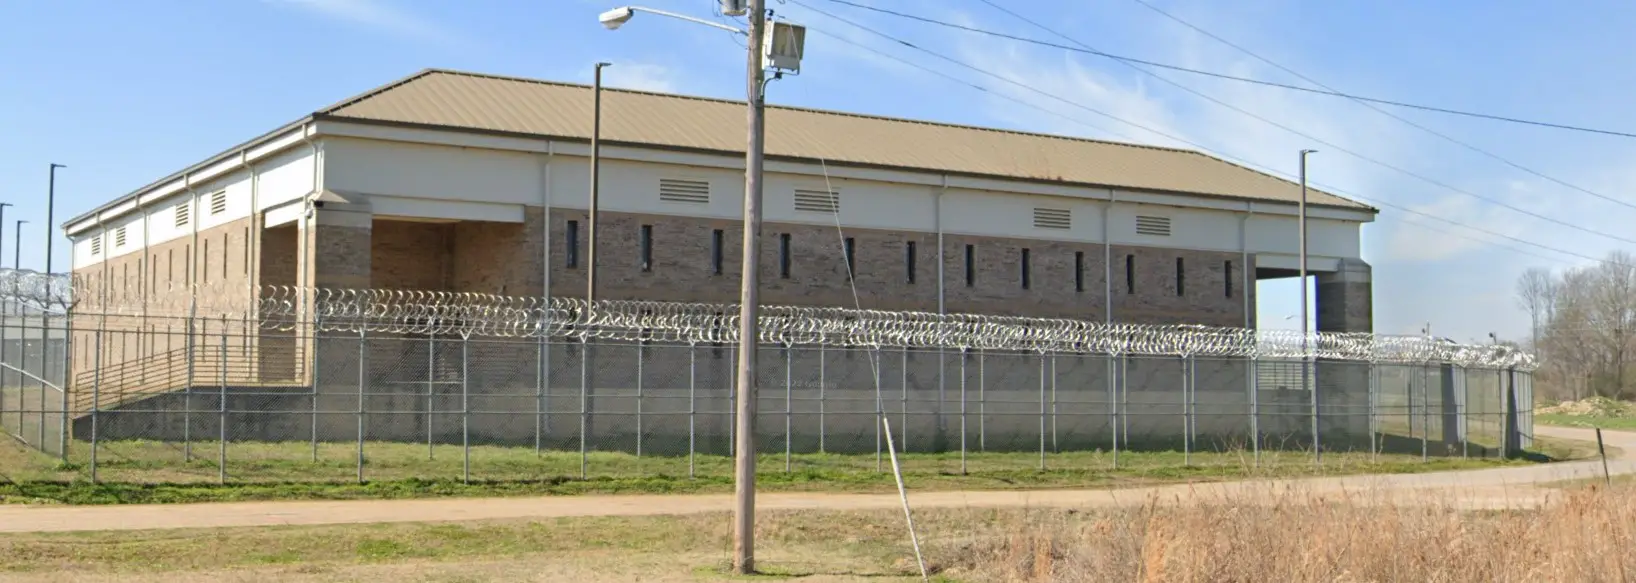 Photos Madison County Detention Center 5